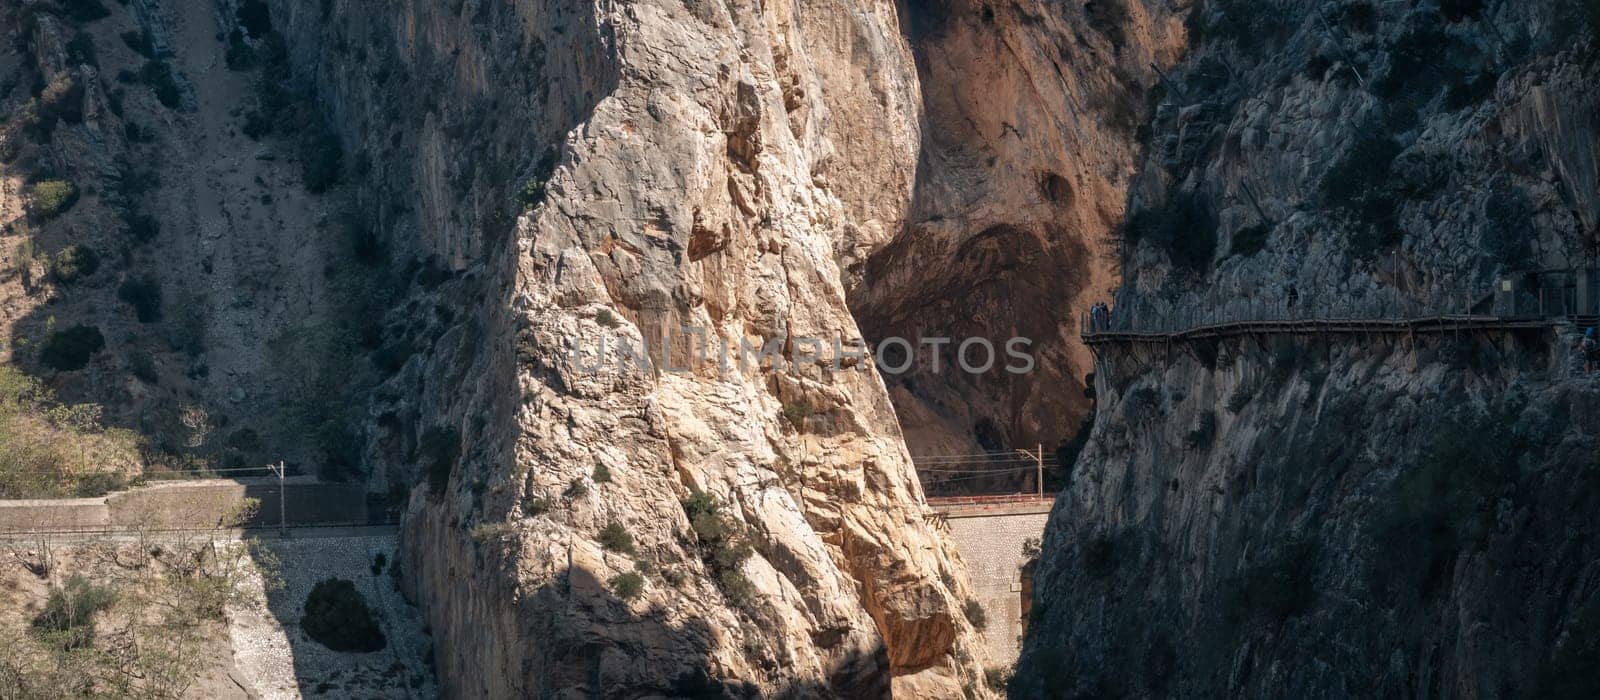 Tourists Exploring the Majestic Caminito del Rey Canyons and Trails by FerradalFCG